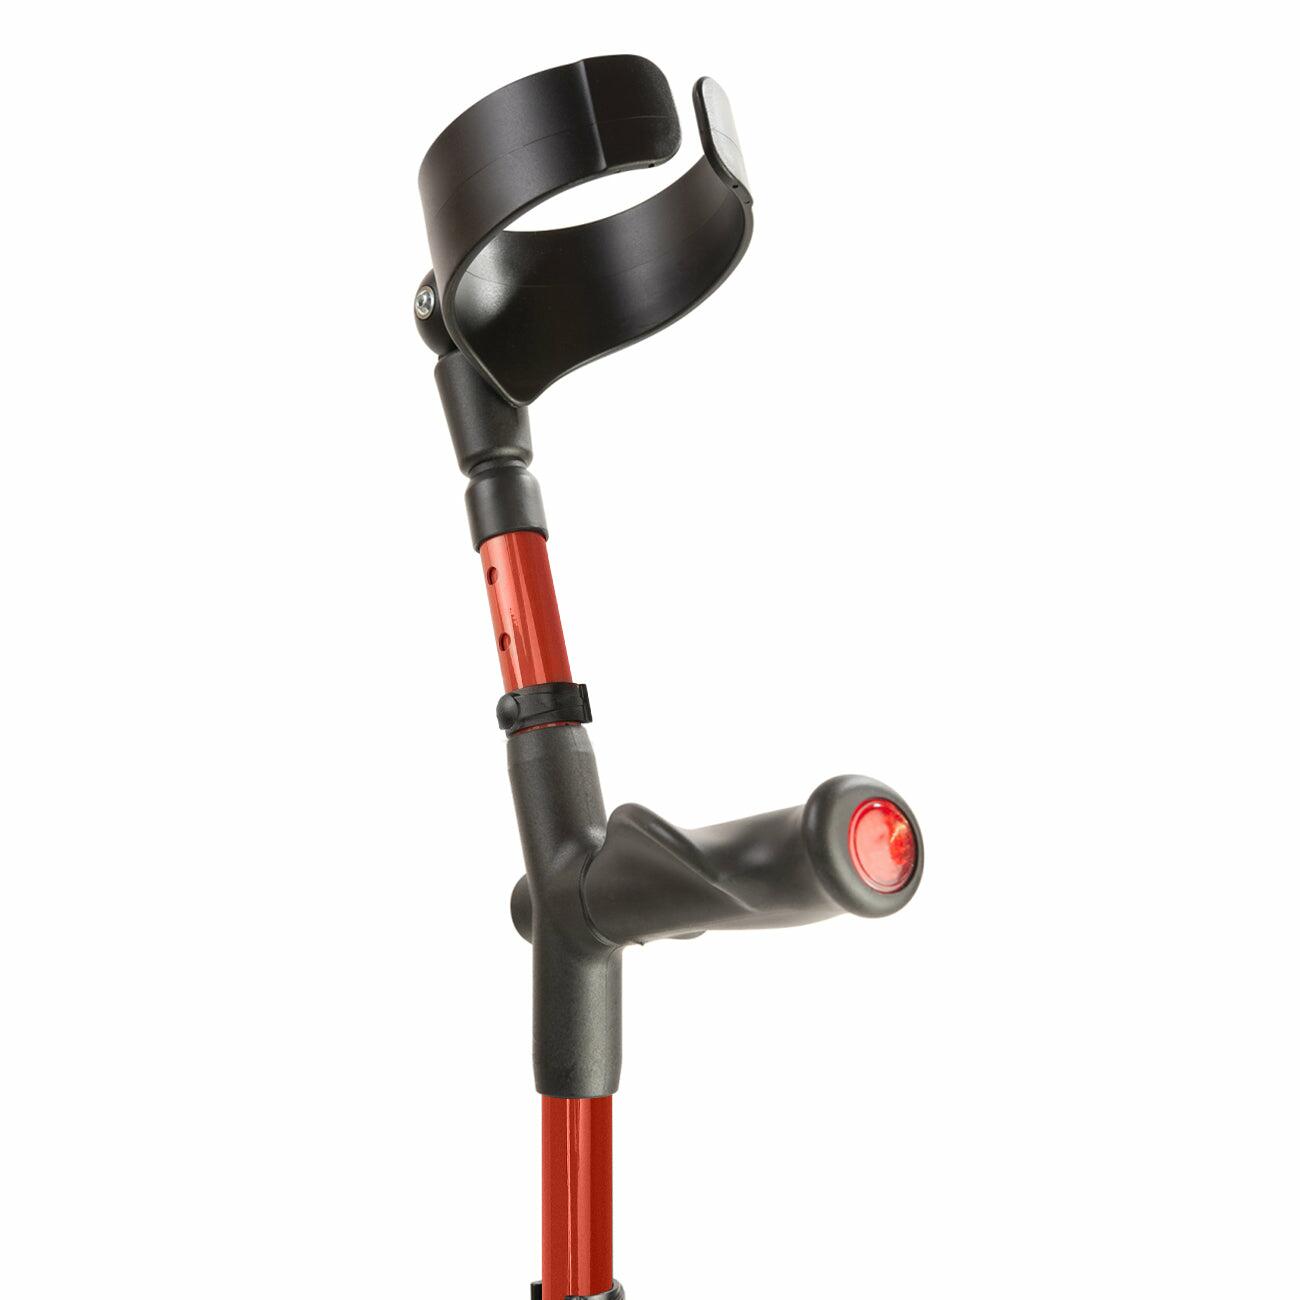 Comfort grip handle and closed cuff of a red Flexyfoot Comfort Grip Double Adjustable Crutch